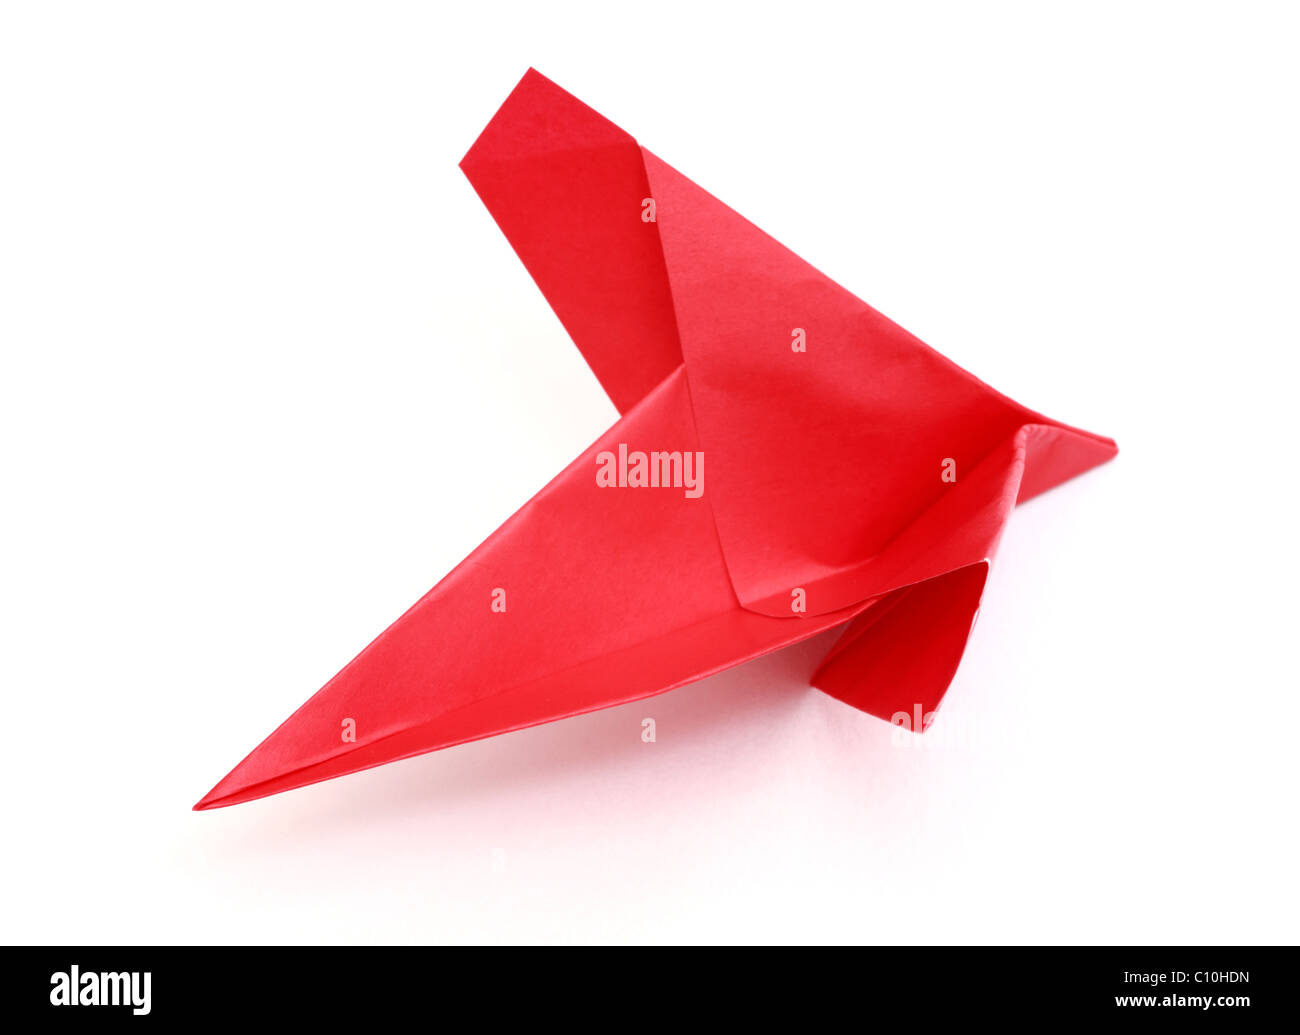 Red Origami Paper Bird Stock Photo, Picture and Royalty Free Image